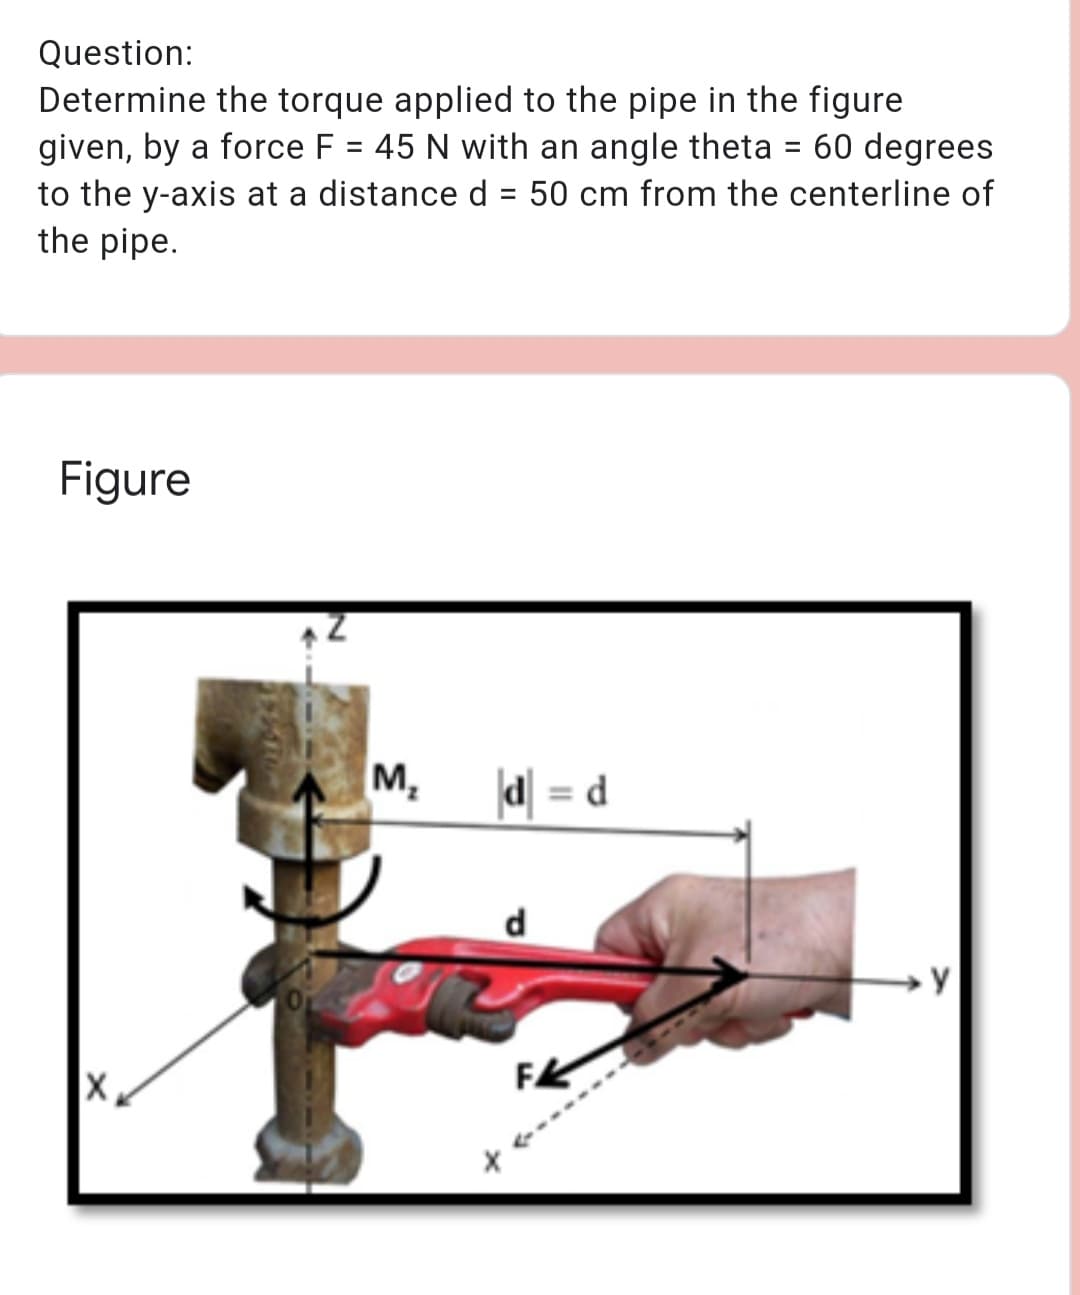 Question:
Determine the torque applied to the pipe in the figure
given, by a force F = 45 N with an angle theta = 60 degrees
to the y-axis at a distance d = 50 cm from the centerline of
the pipe.
%3D
Figure
M,
d = d
d
FK
